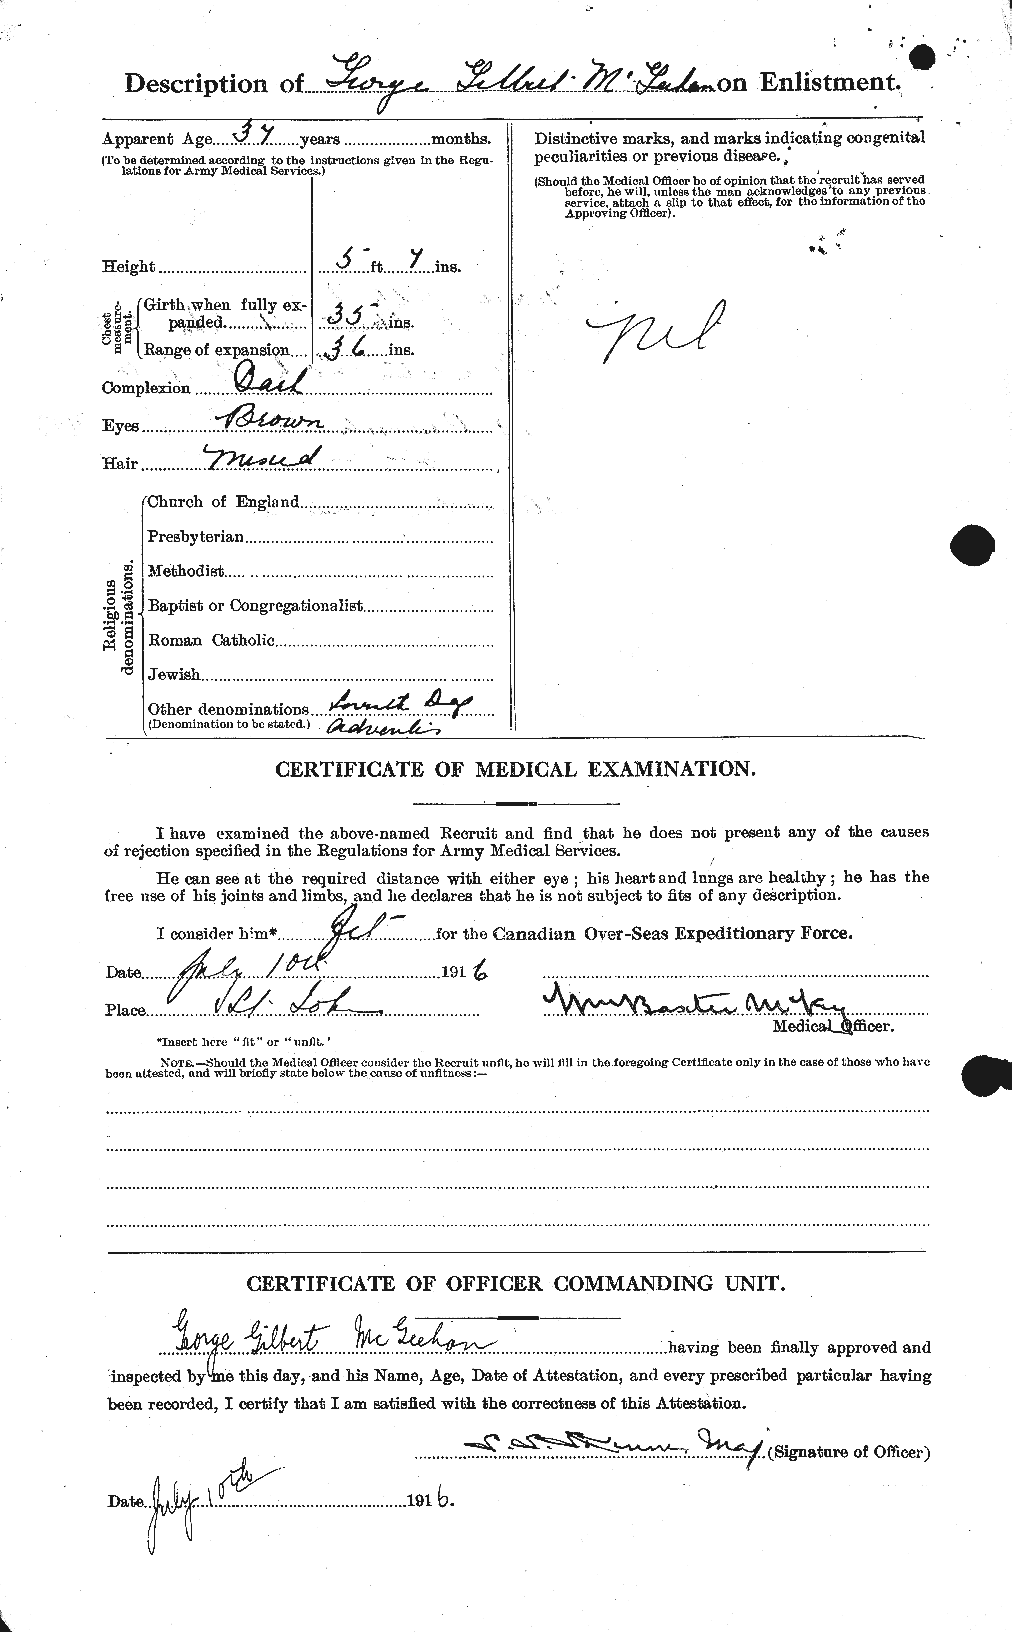 Personnel Records of the First World War - CEF 522412b